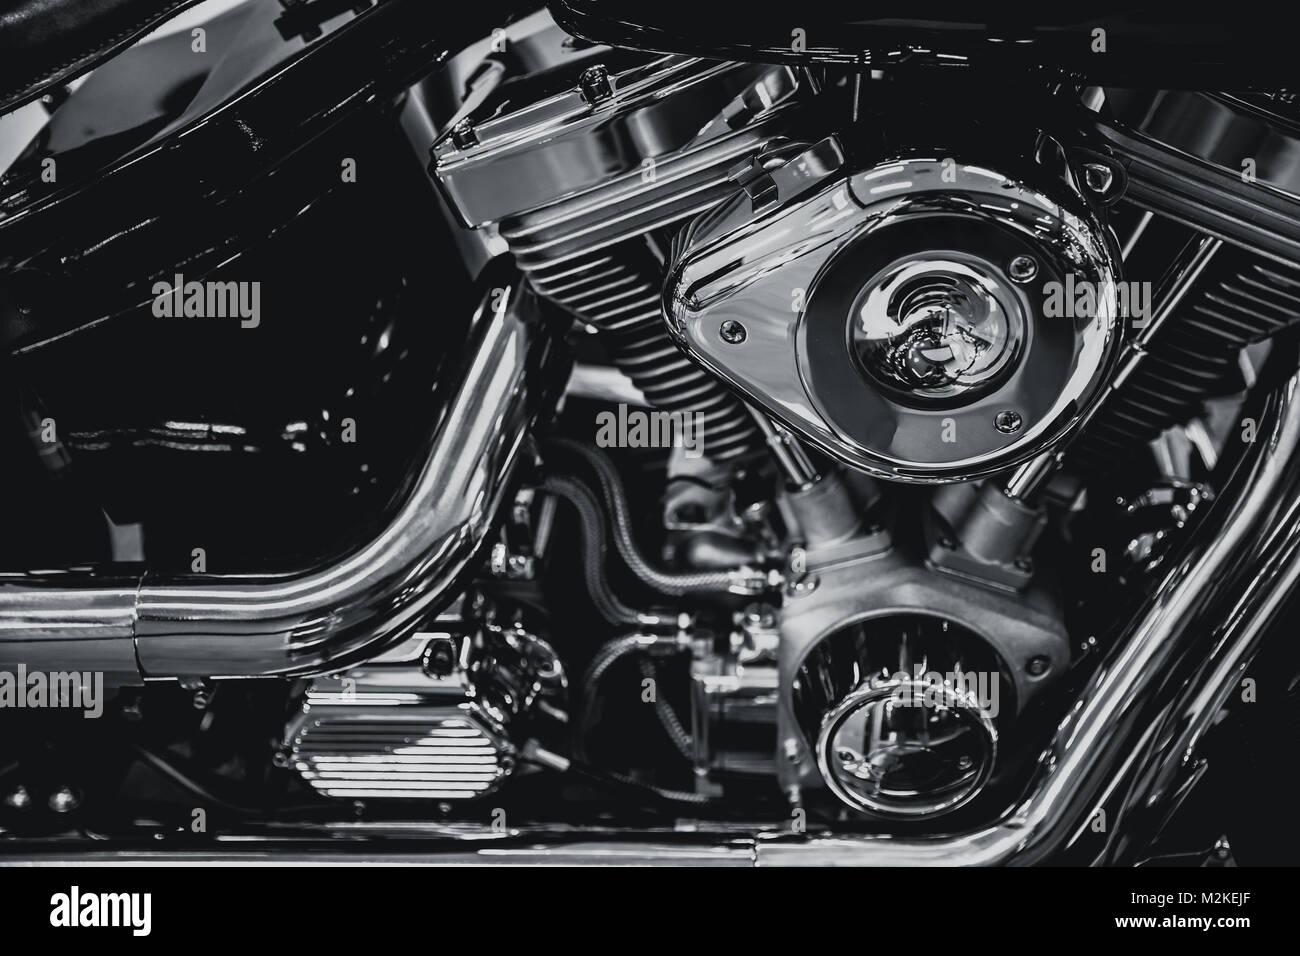 Luxury modern chrome Chopper Engine art photography in black and white vintage tone Stock Photo